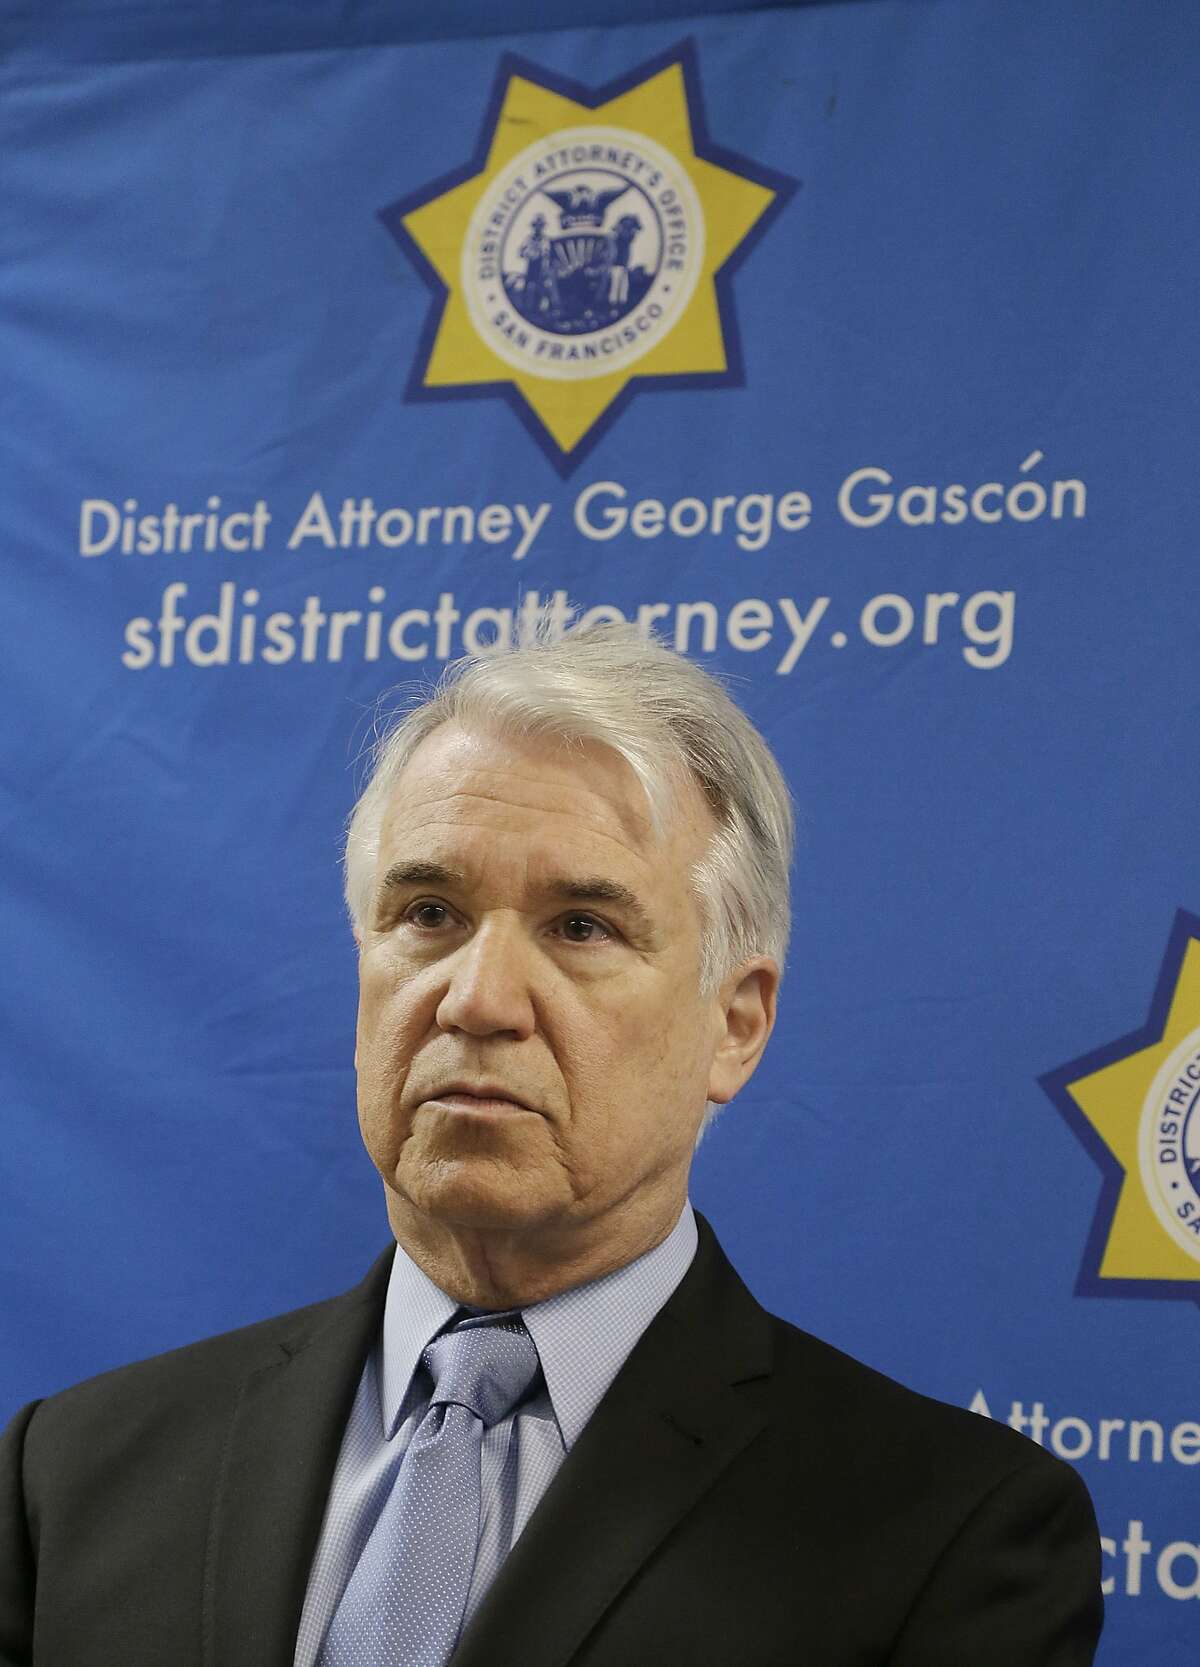 San Francisco District Attorney George Gascón is shown at a news conference in San Francisco, Tuesday, Feb. 16, 2016. (AP Photo/Jeff Chiu)